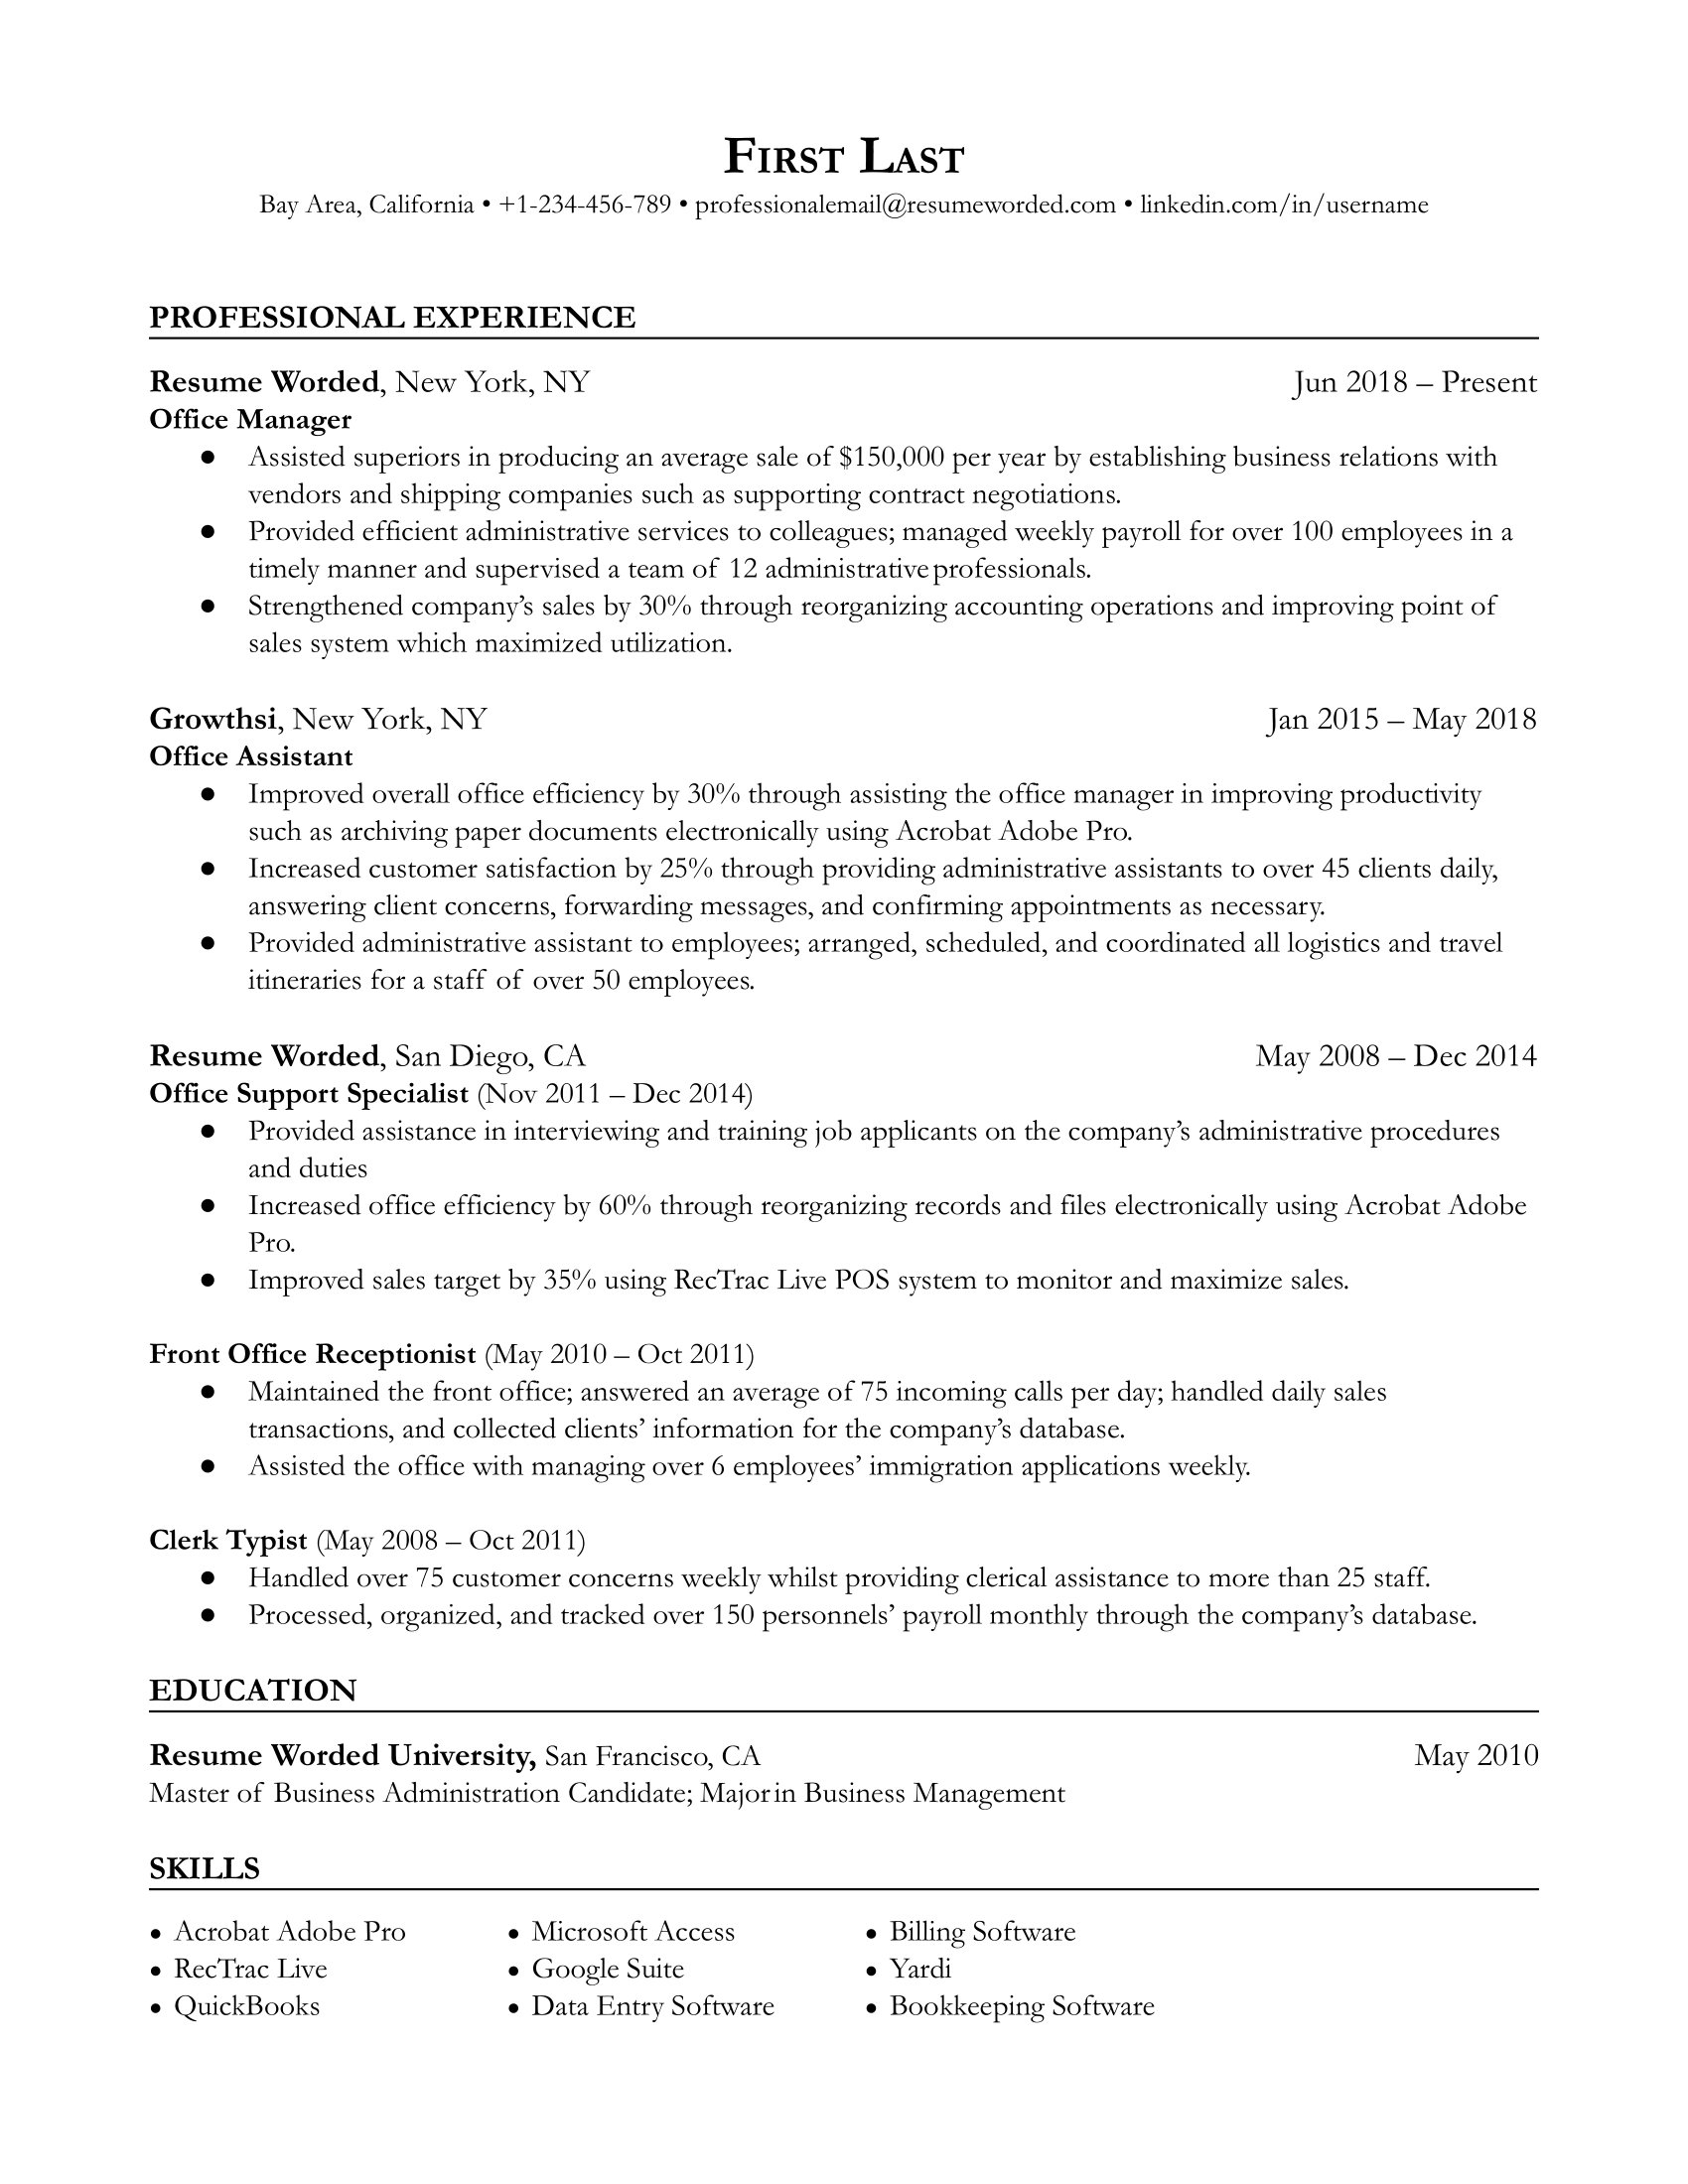 Office manager resume showcasing experience and software skills.